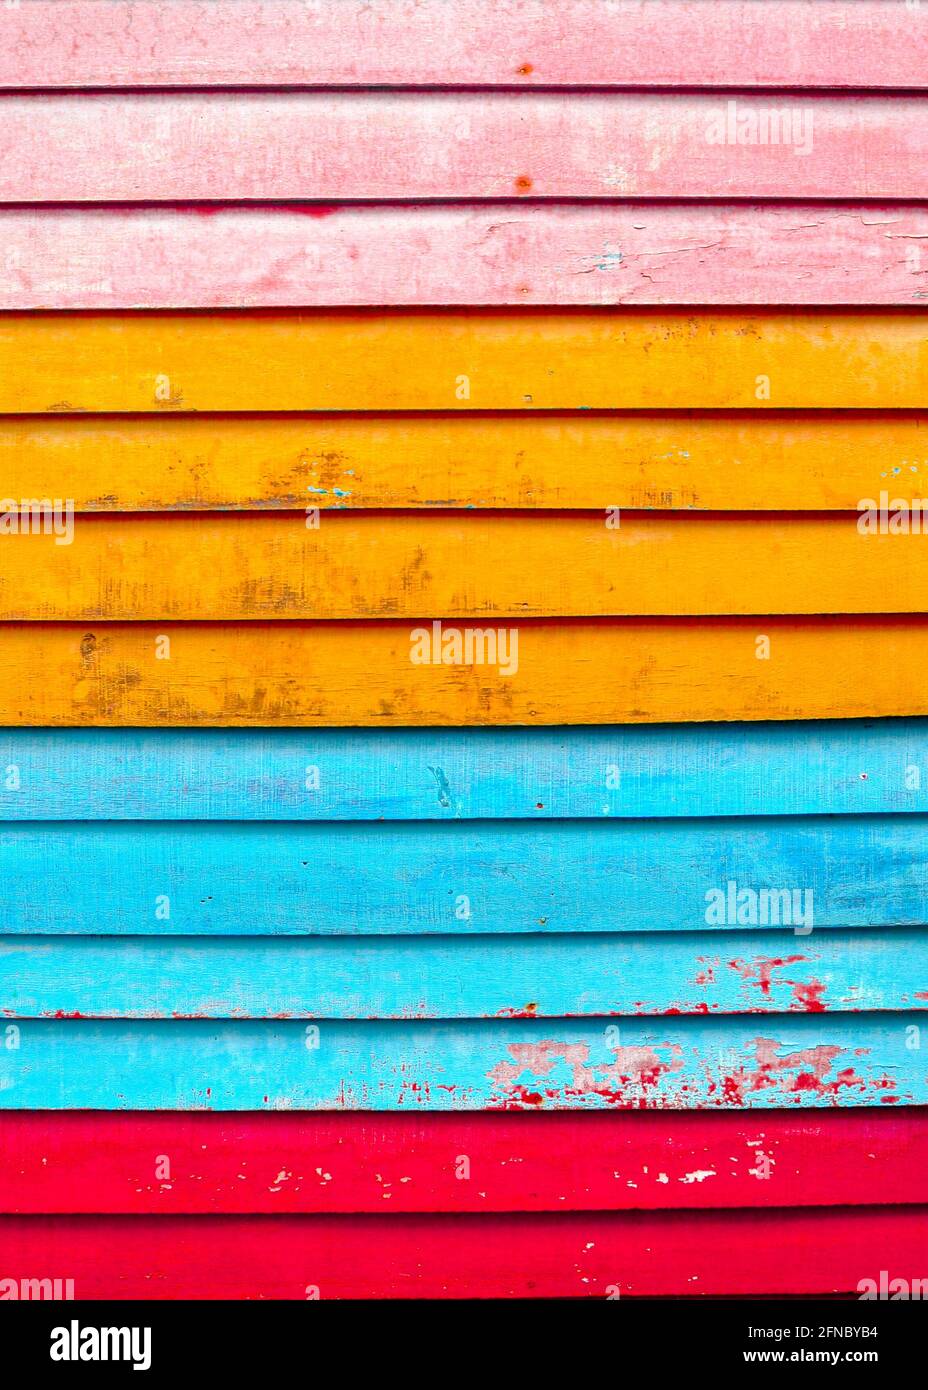 Colourful textured background of colourful, distressed horizontal wooden slats. Stock Photo